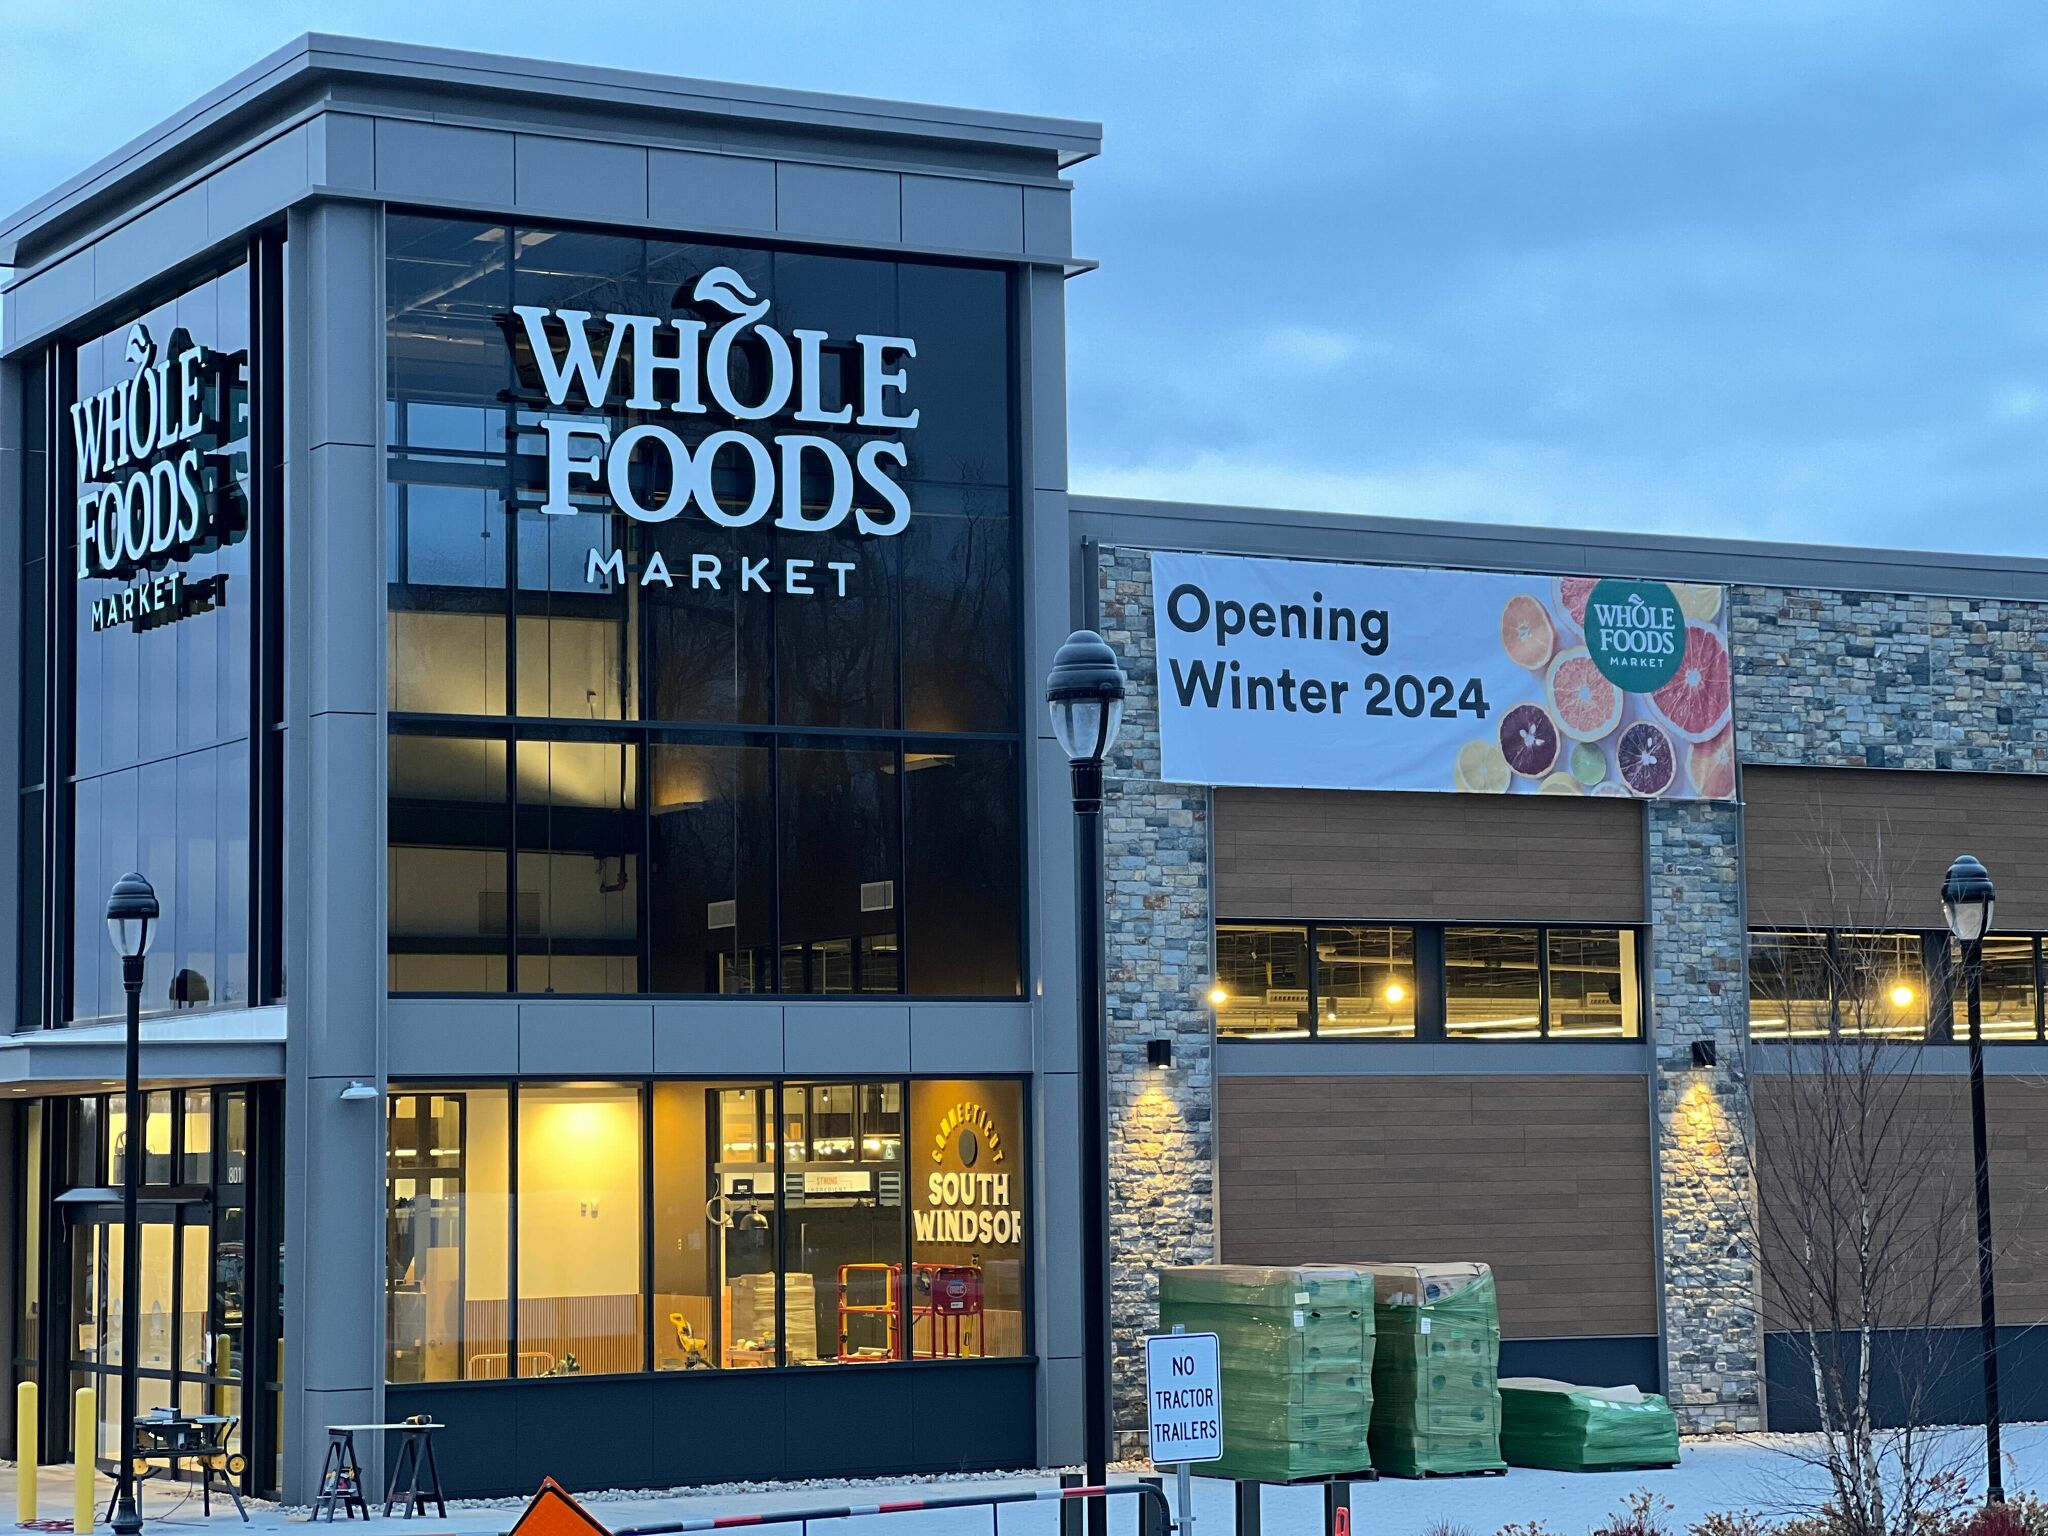 South Windsor's new Whole Foods supermarket could be open by January